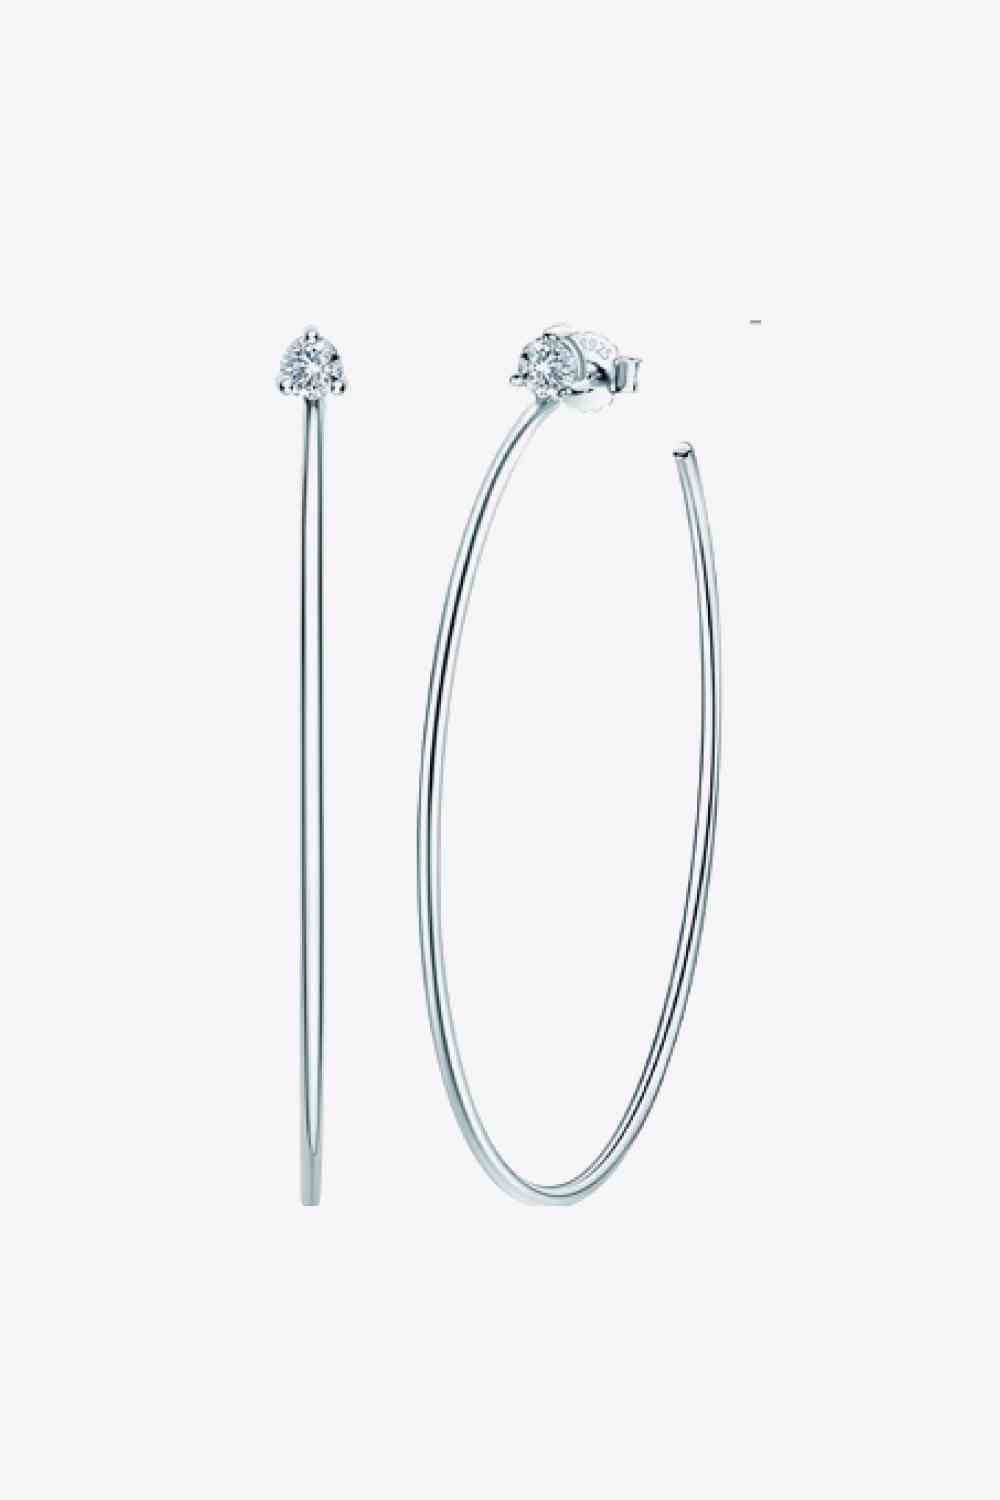 a pair of hoop earrings with a diamond on top